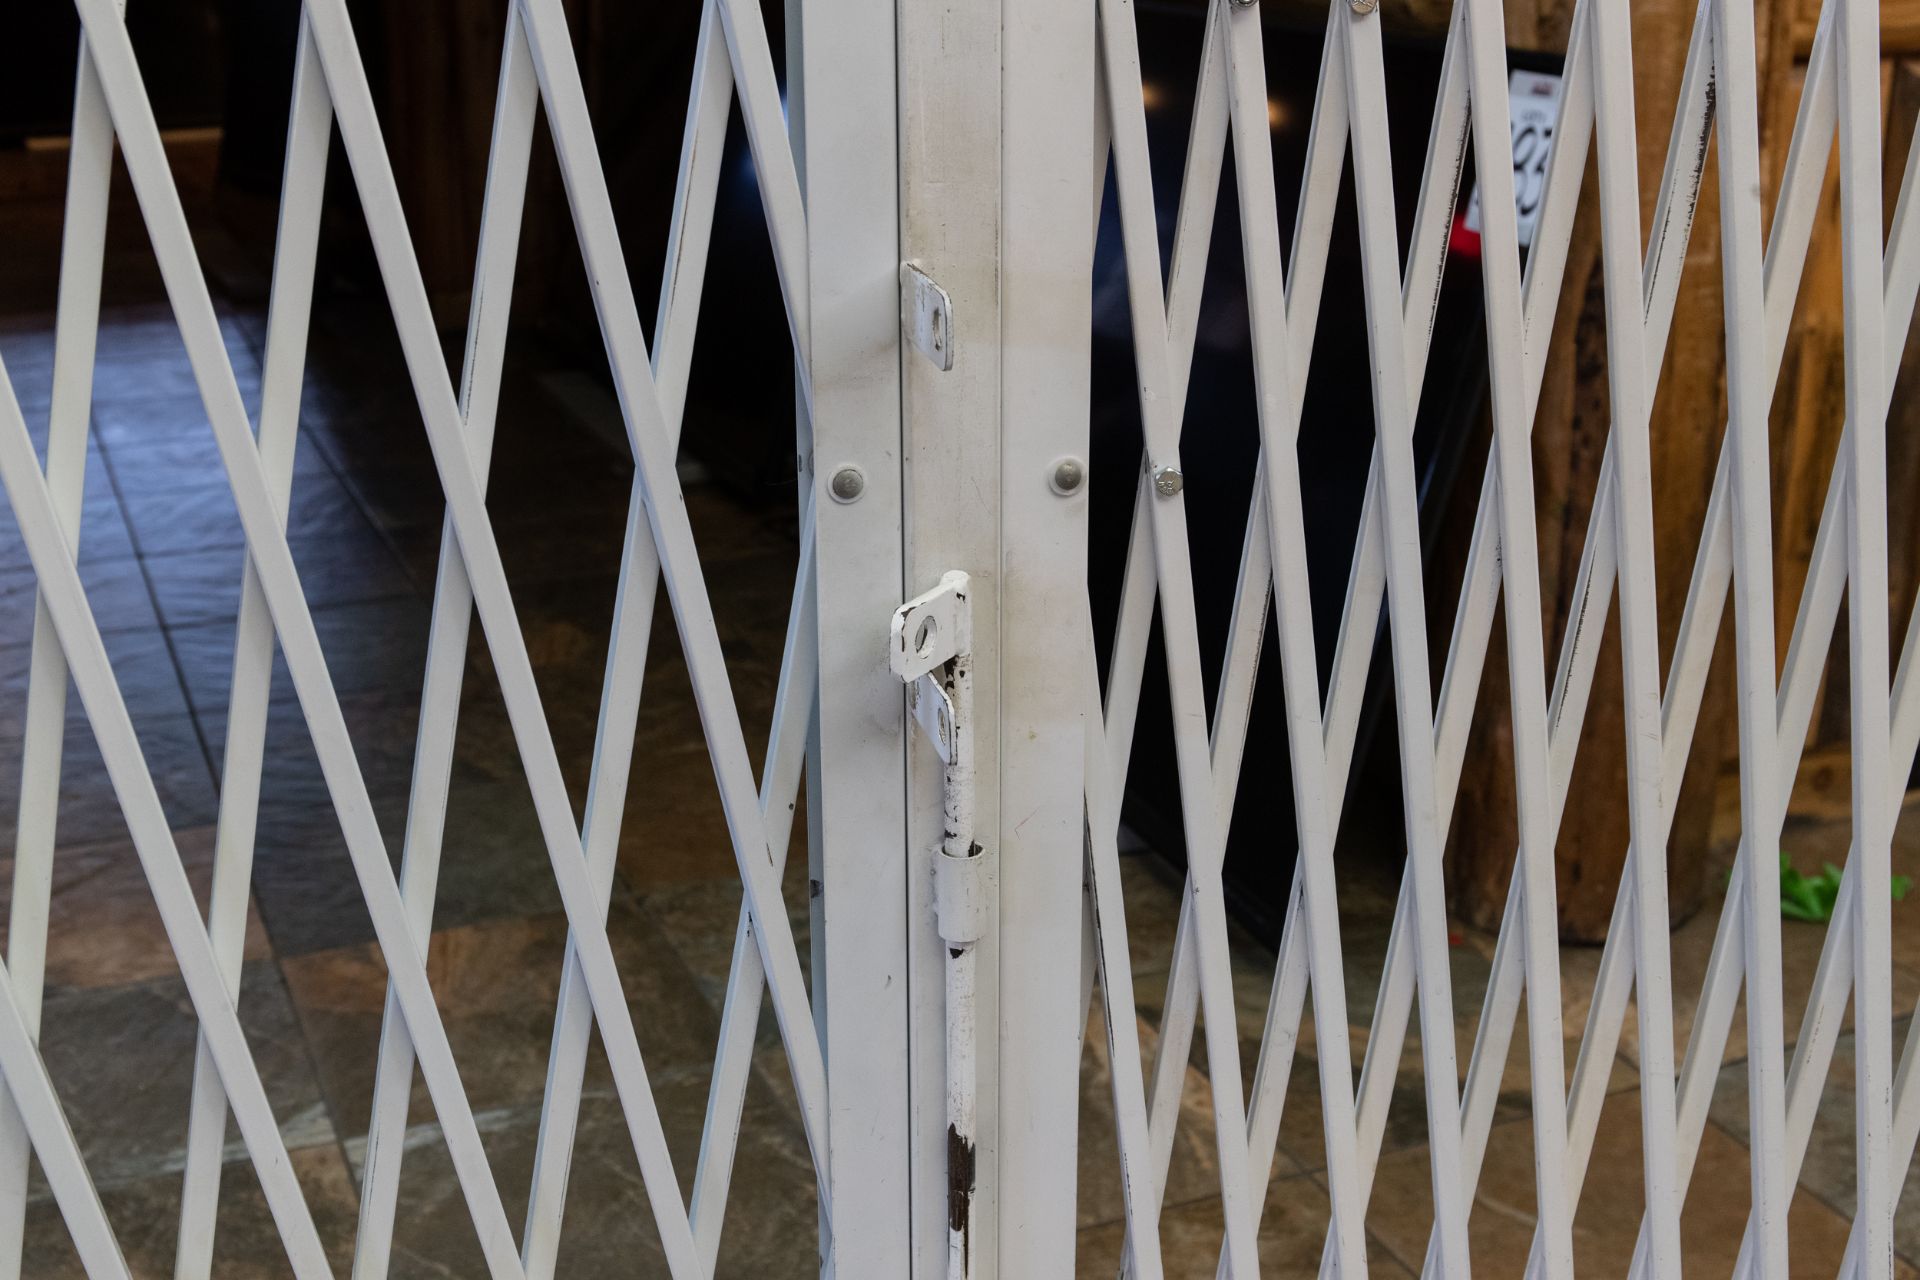 LOCKABLE ACCORDIAN STYLE SECURITY FENCE - 17FT. - Image 3 of 4